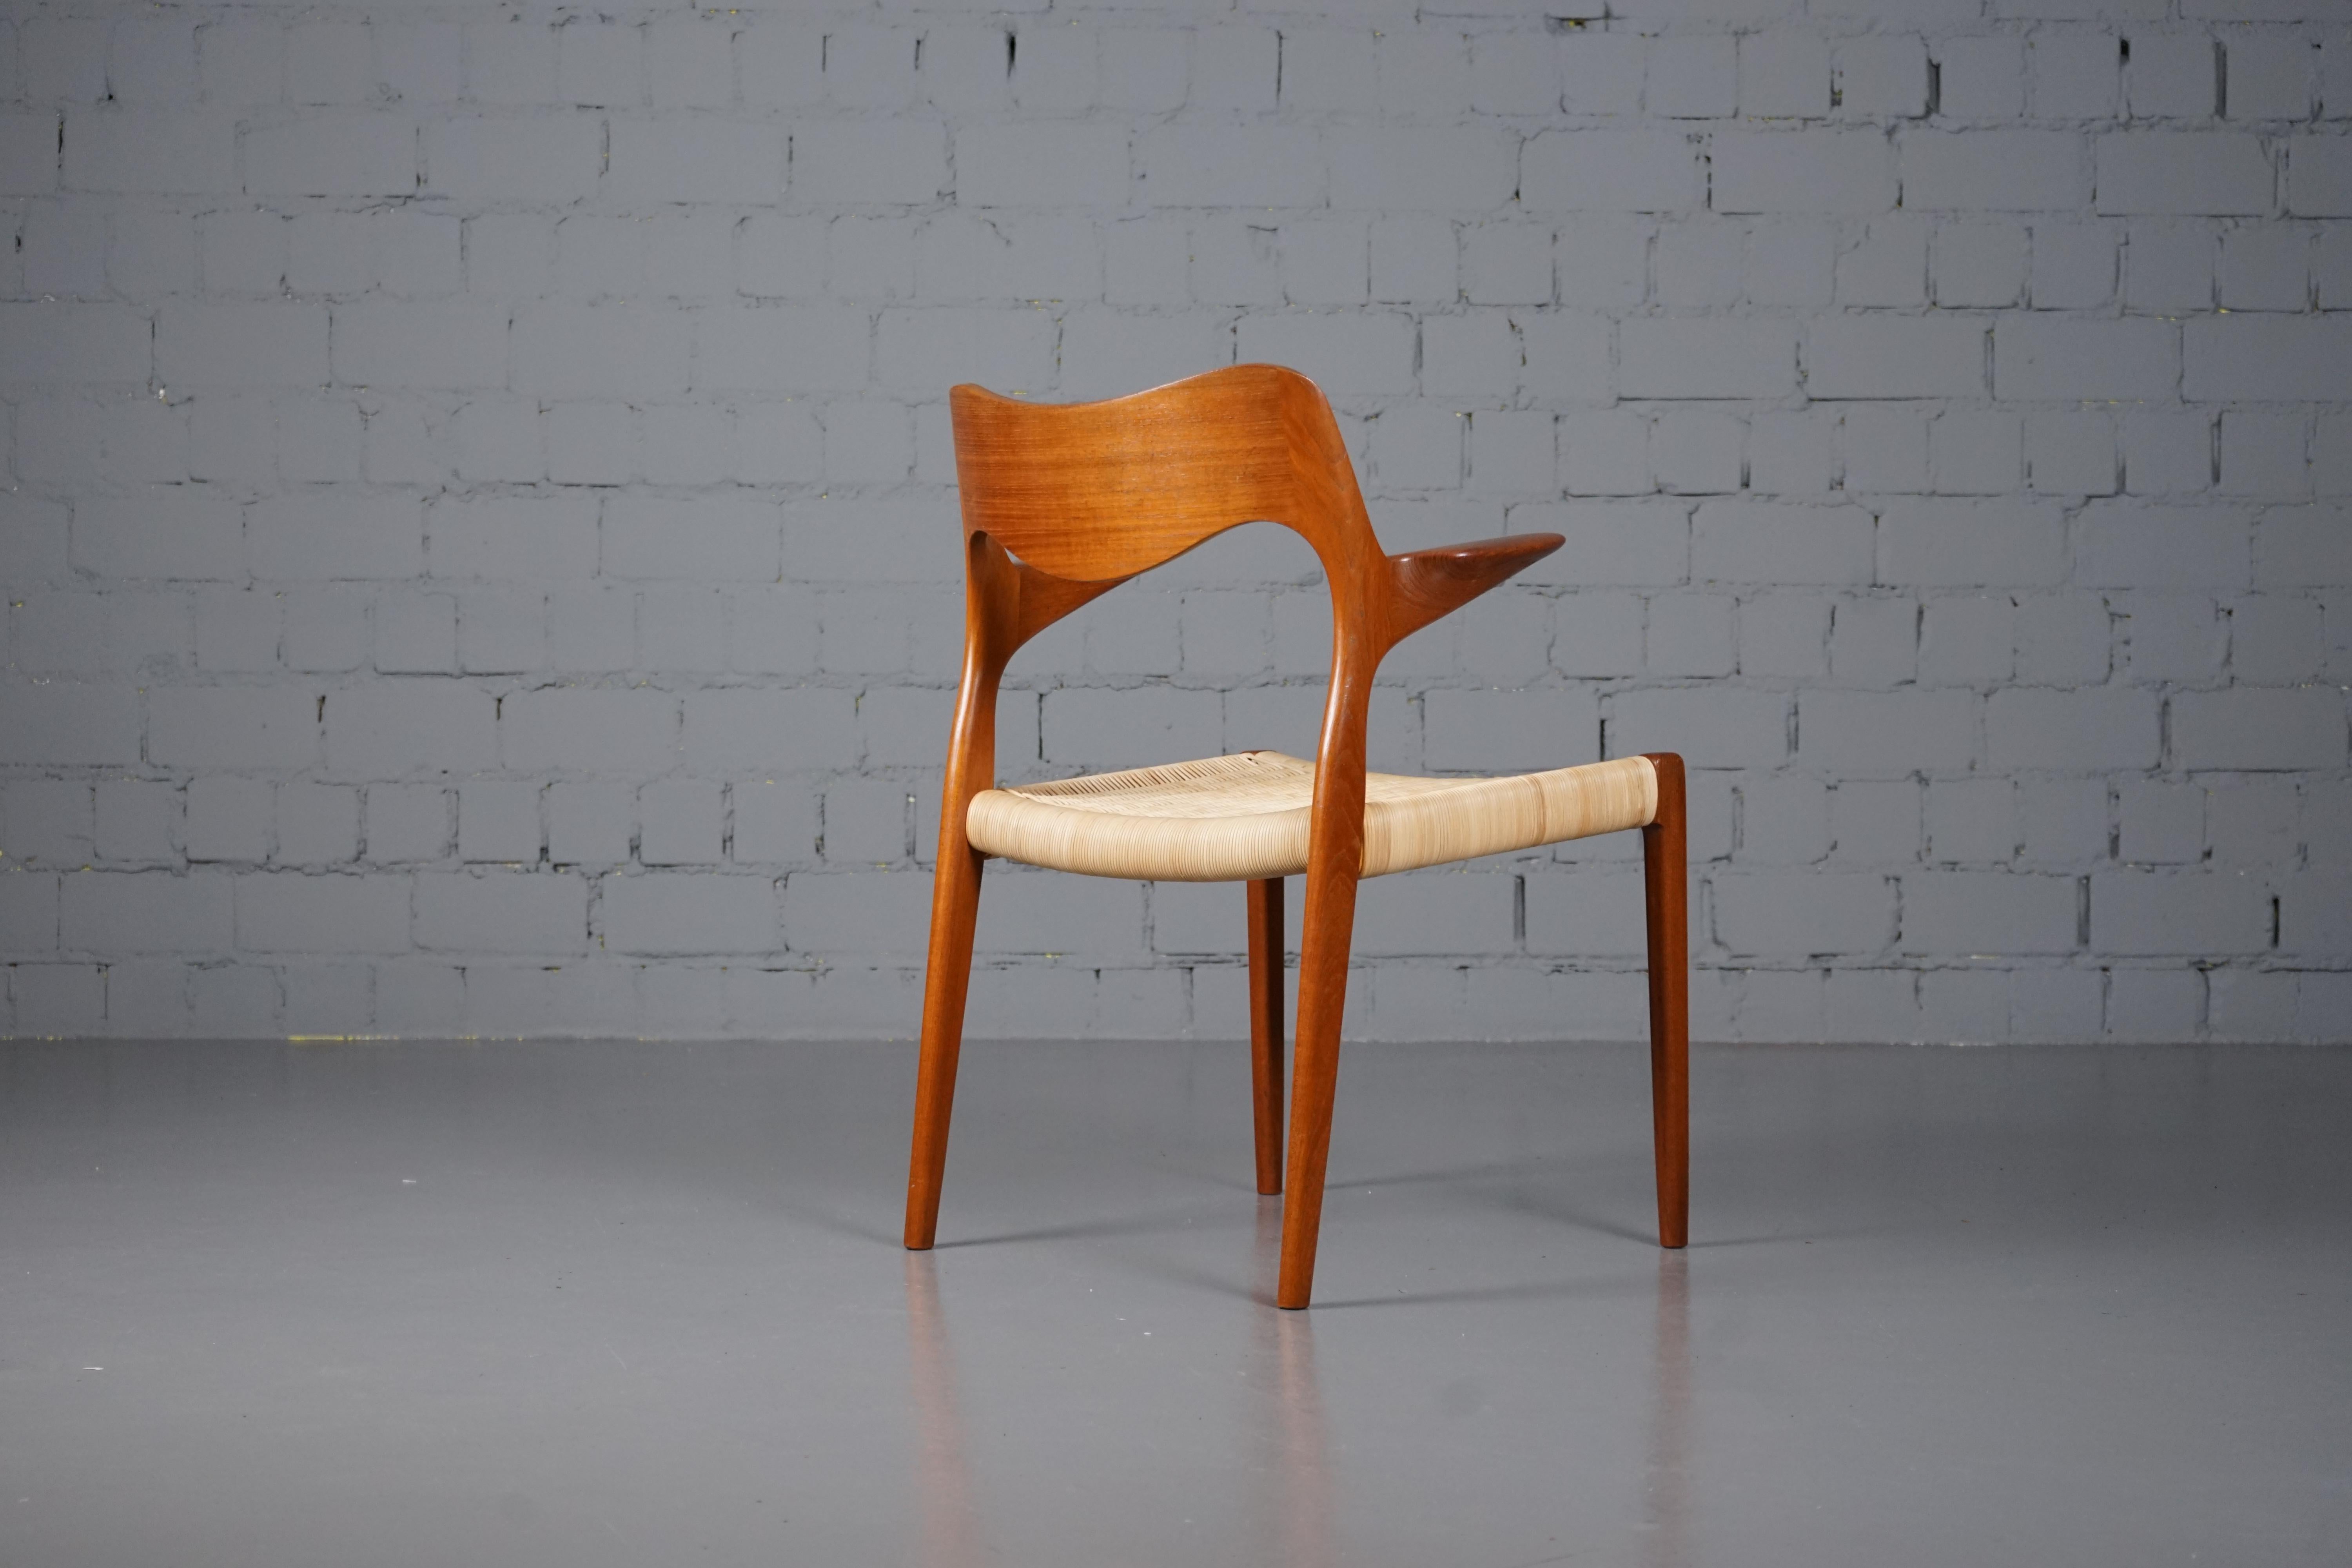 Mid-20th Century Teak Chair Model No. 55 Chair by Niels O. Moller for J.L Møller